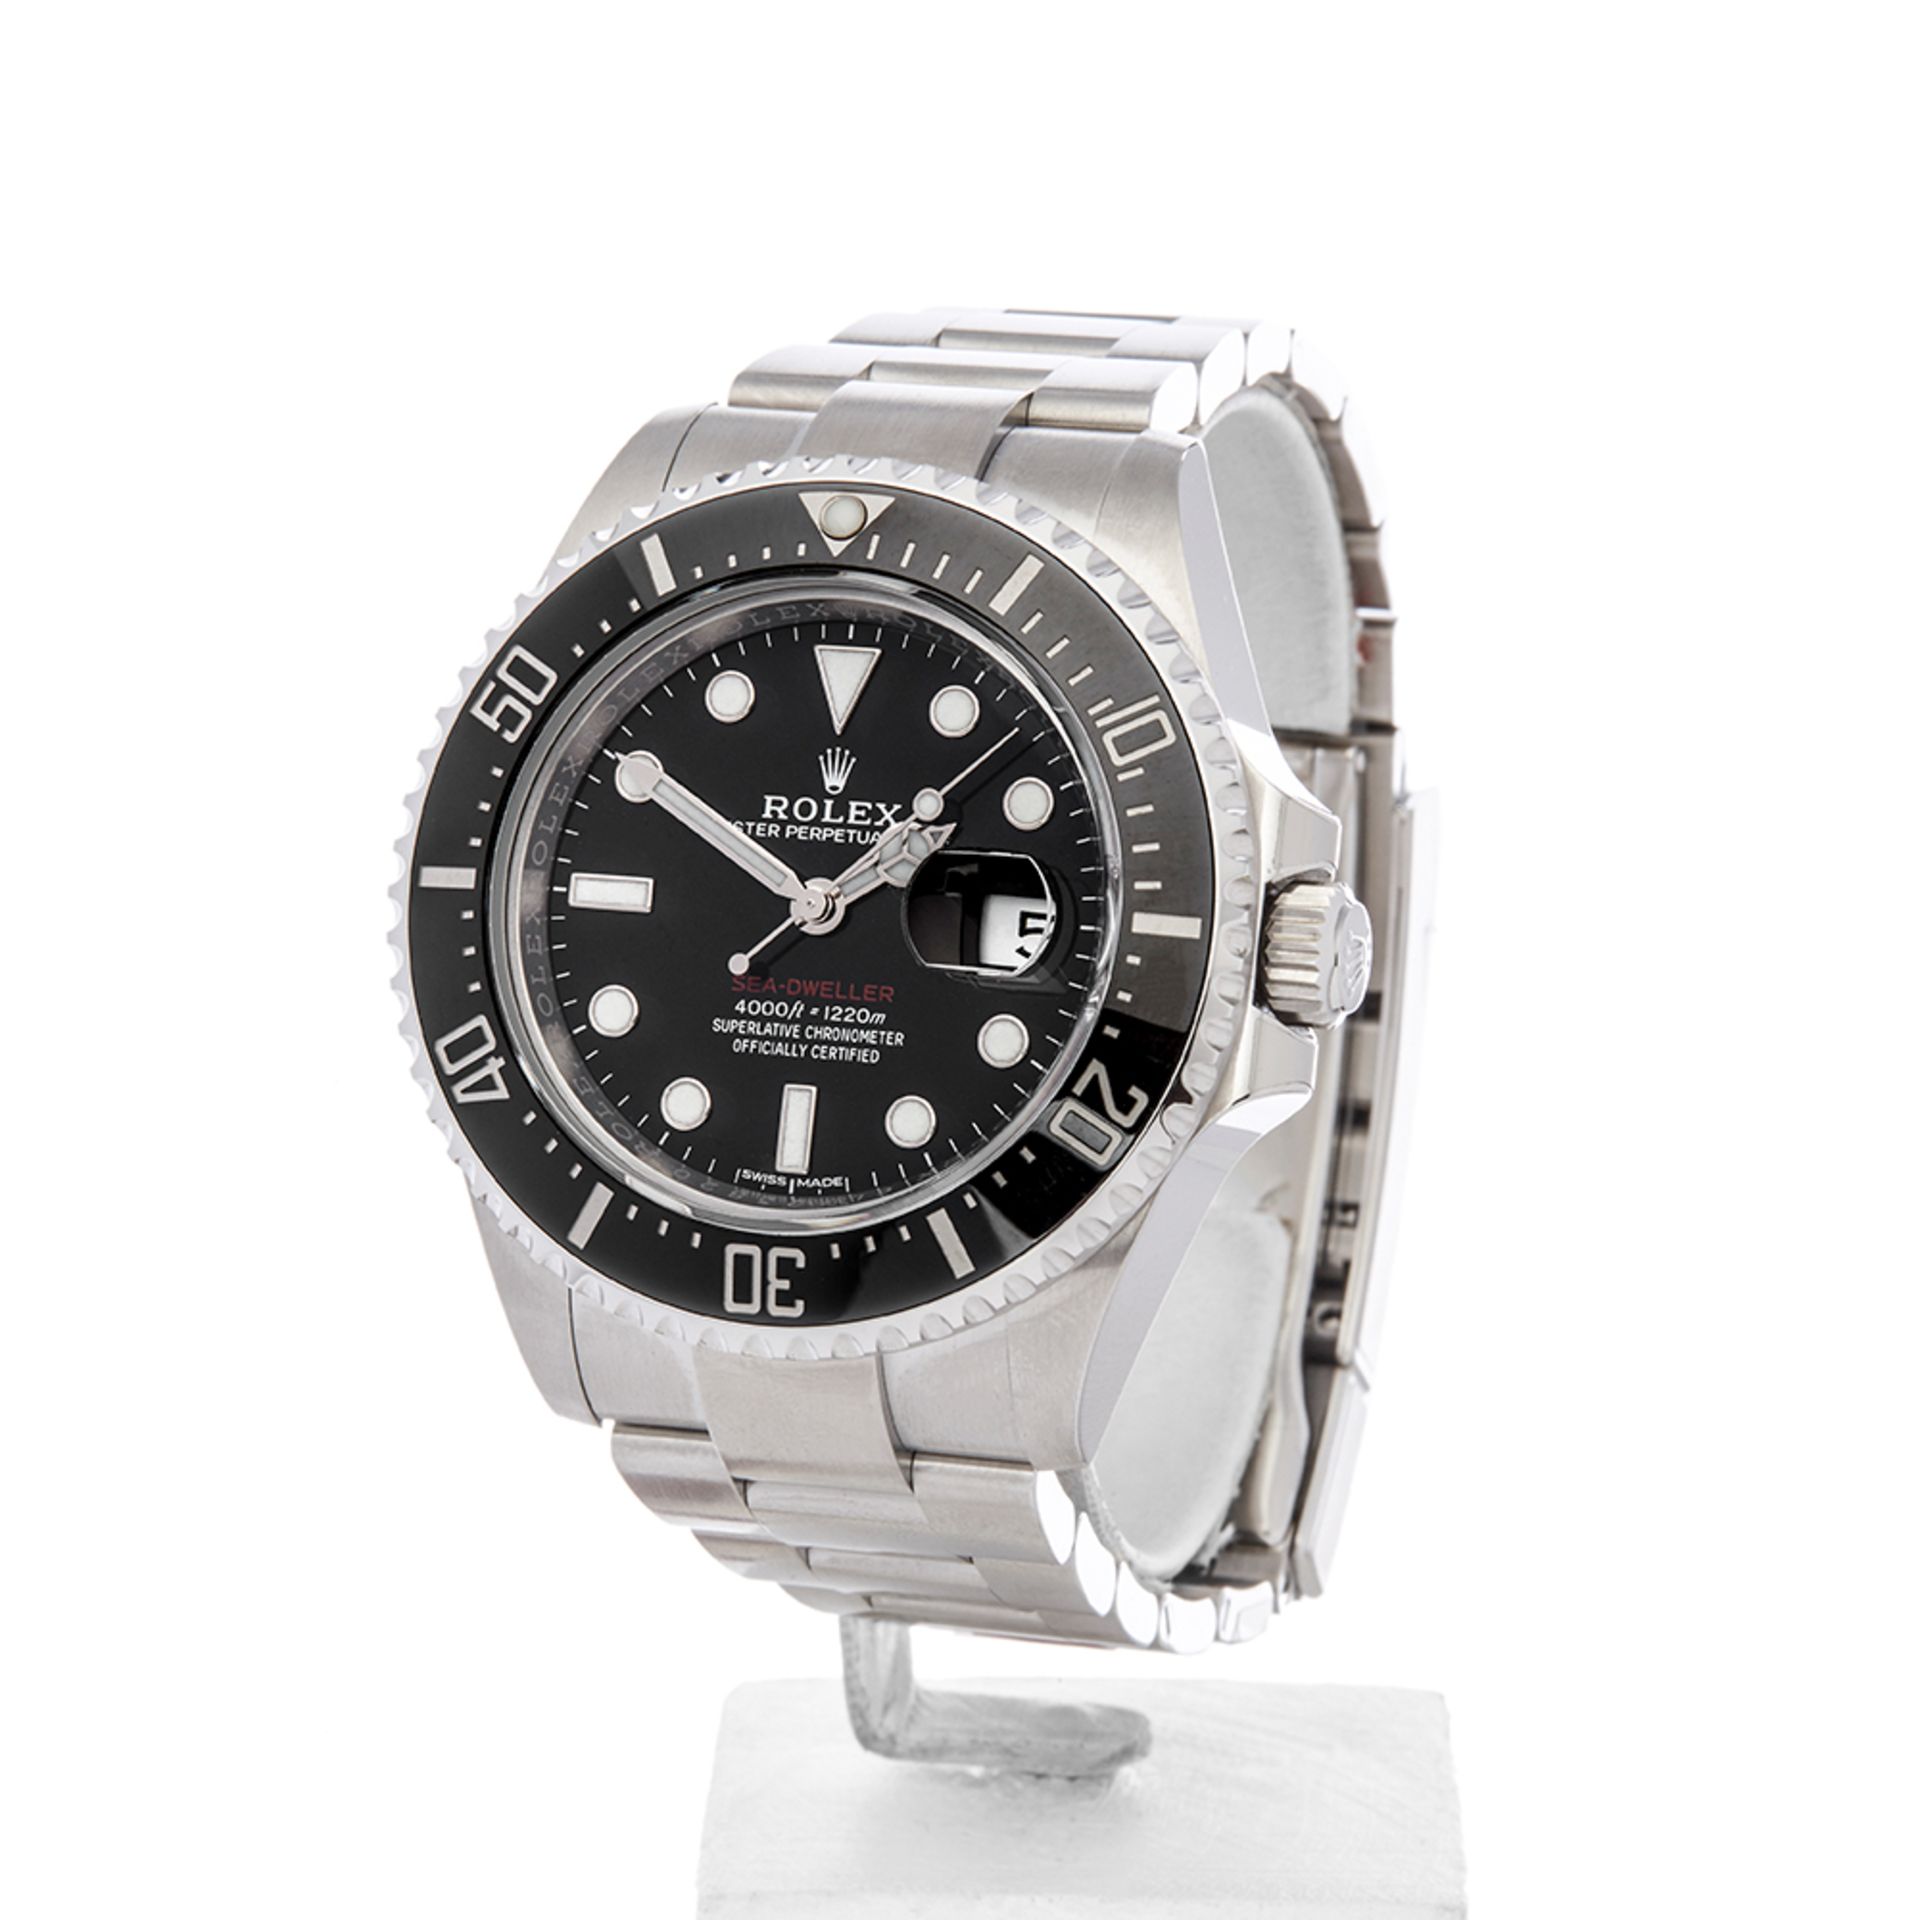 Rolex Sea-dweller 43mm Stainless Steel 126600 - Image 3 of 8